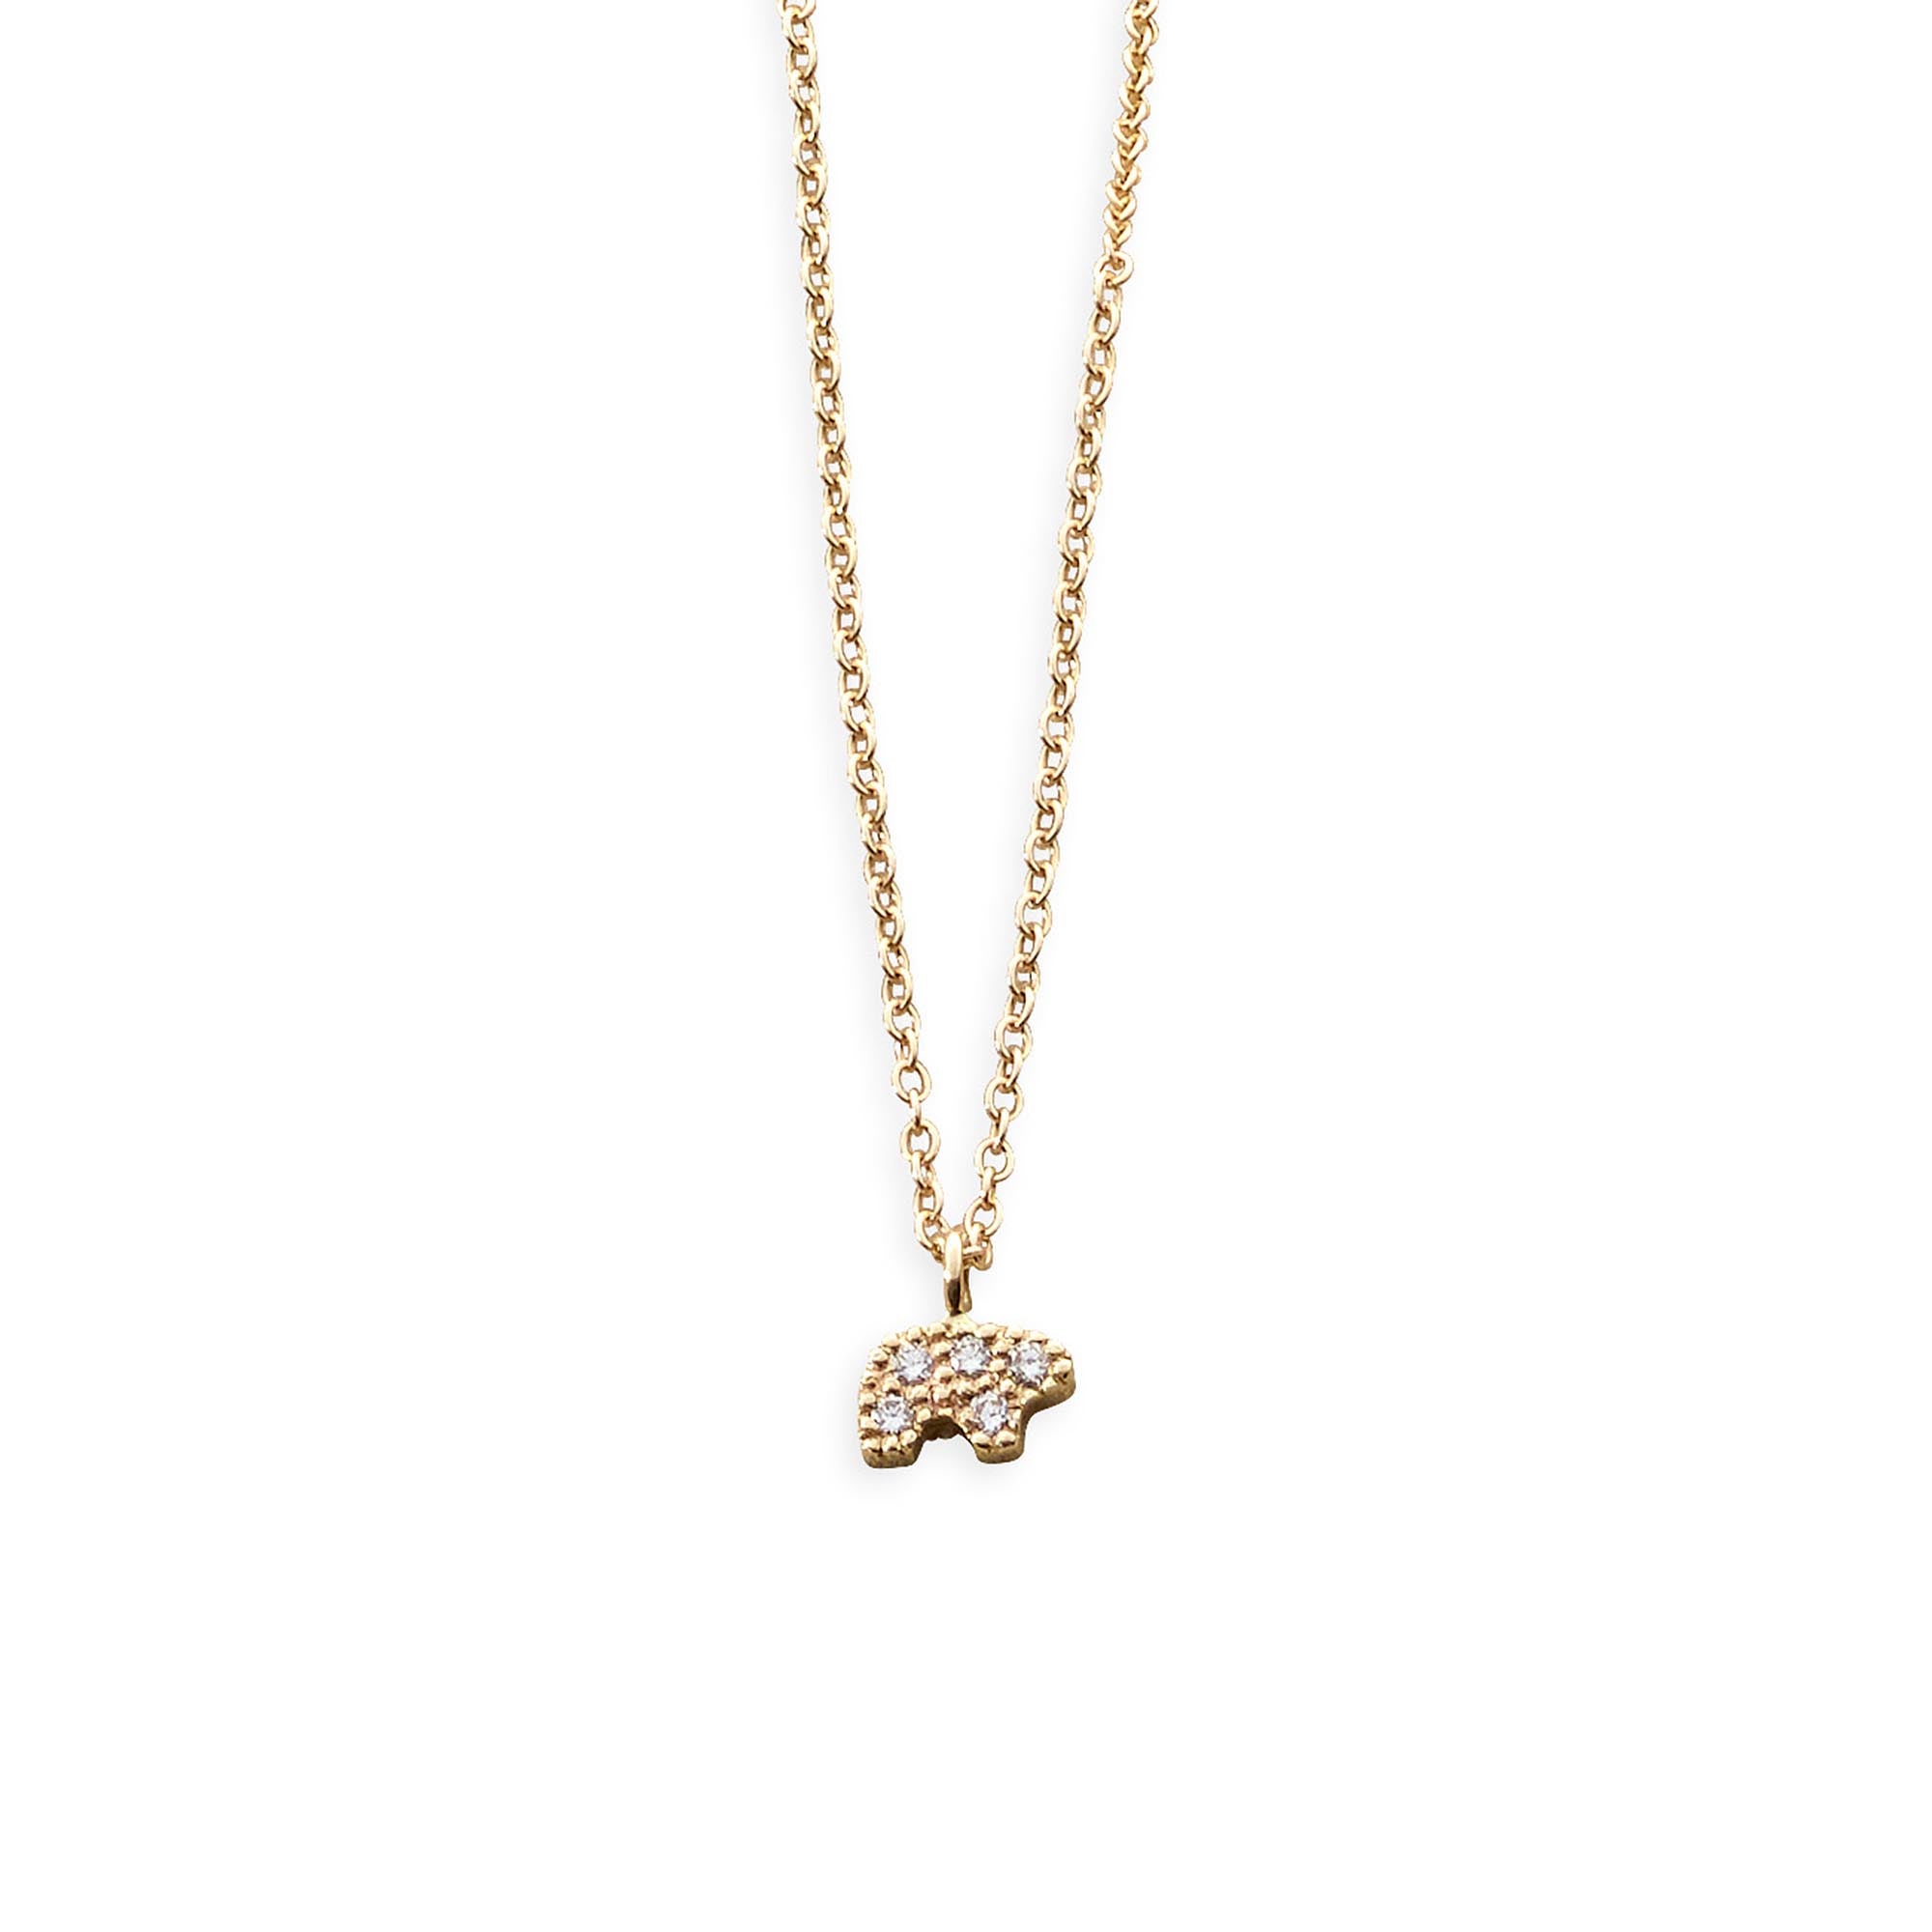 Teddy Bear Charm Necklace | Reeves & Reeves